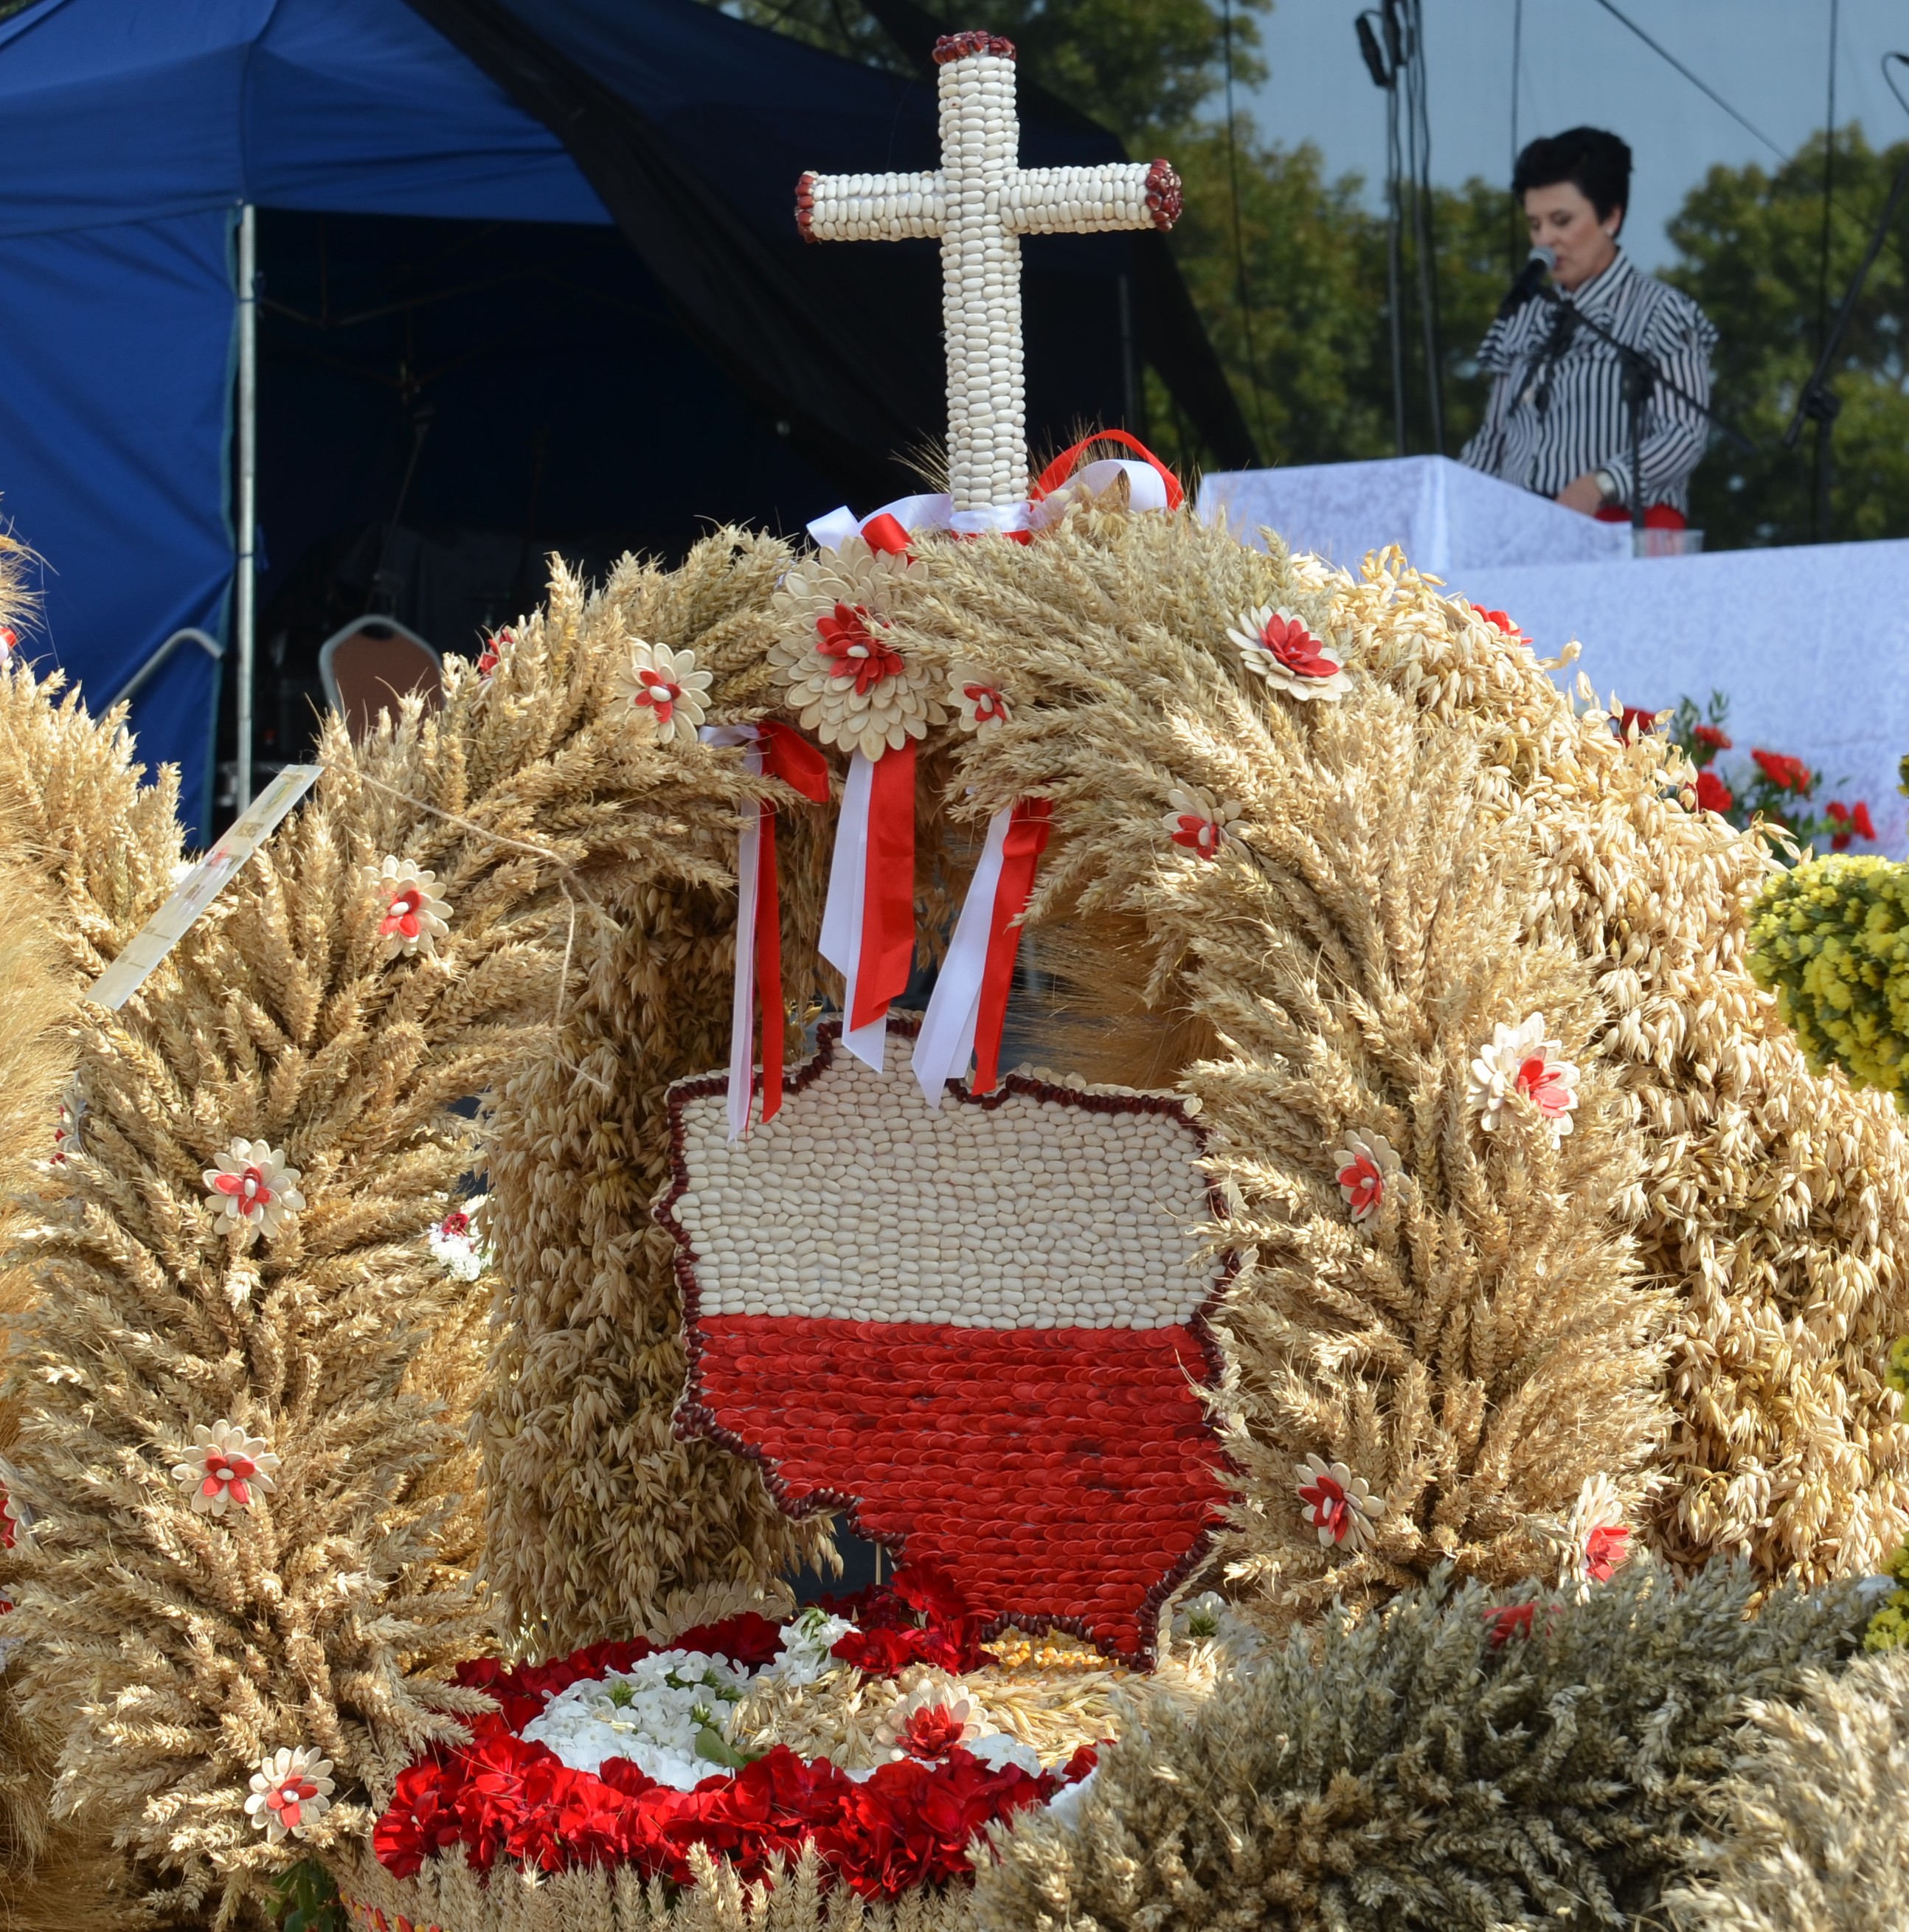  annual harvest festival held in the Municipality of Chełmża 